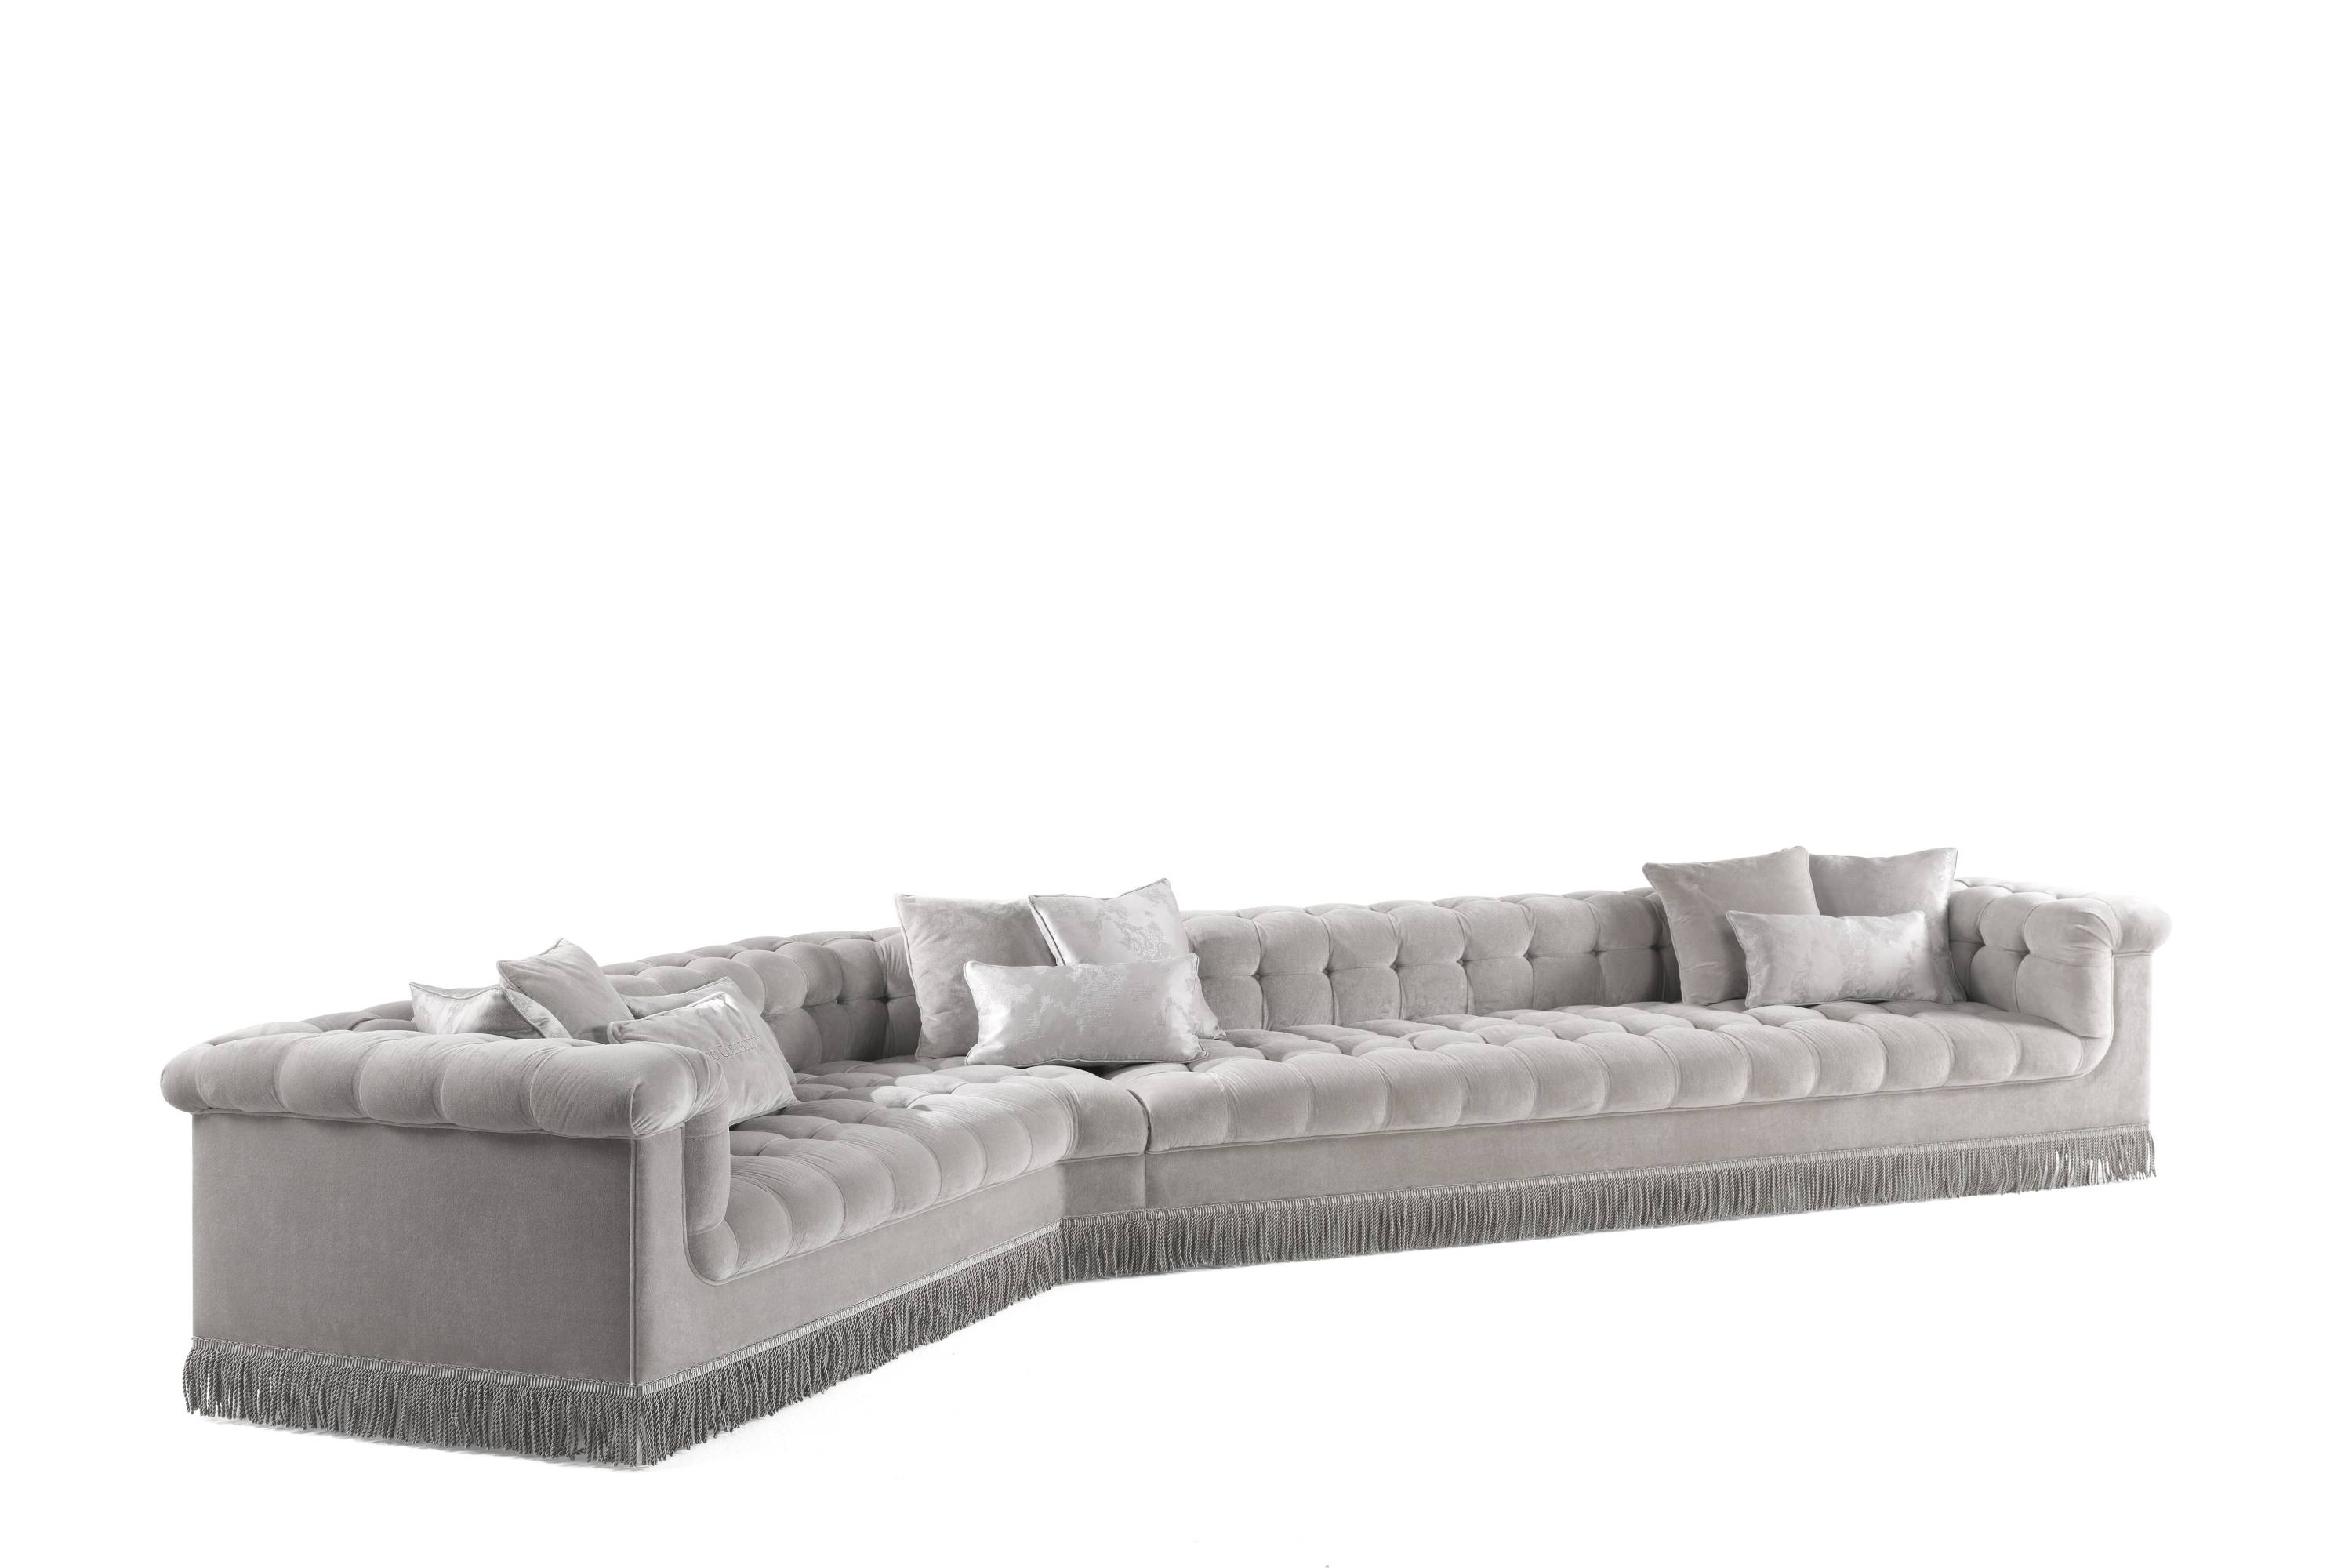 GRAND ARMÉE 2-seater sofa - 3-seater sofa - armchair - sofa - Discover the elegance of luxury Héritage collection by Jumbo collection